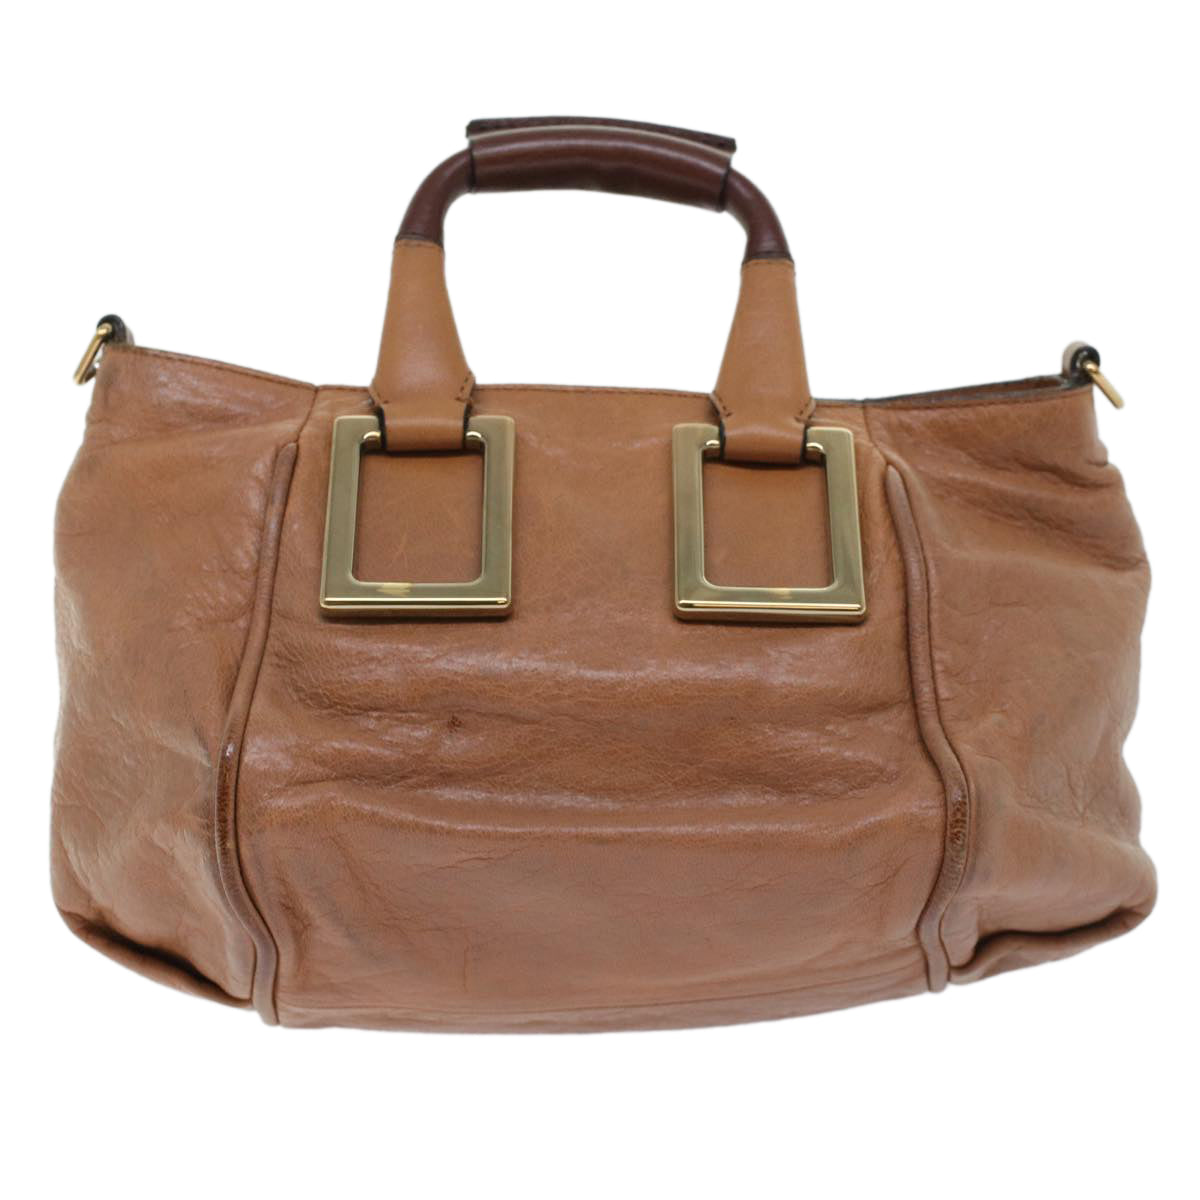 Chloe Etel Hand Bag Leather 2way Brown 03-12-50-65 Auth th4017